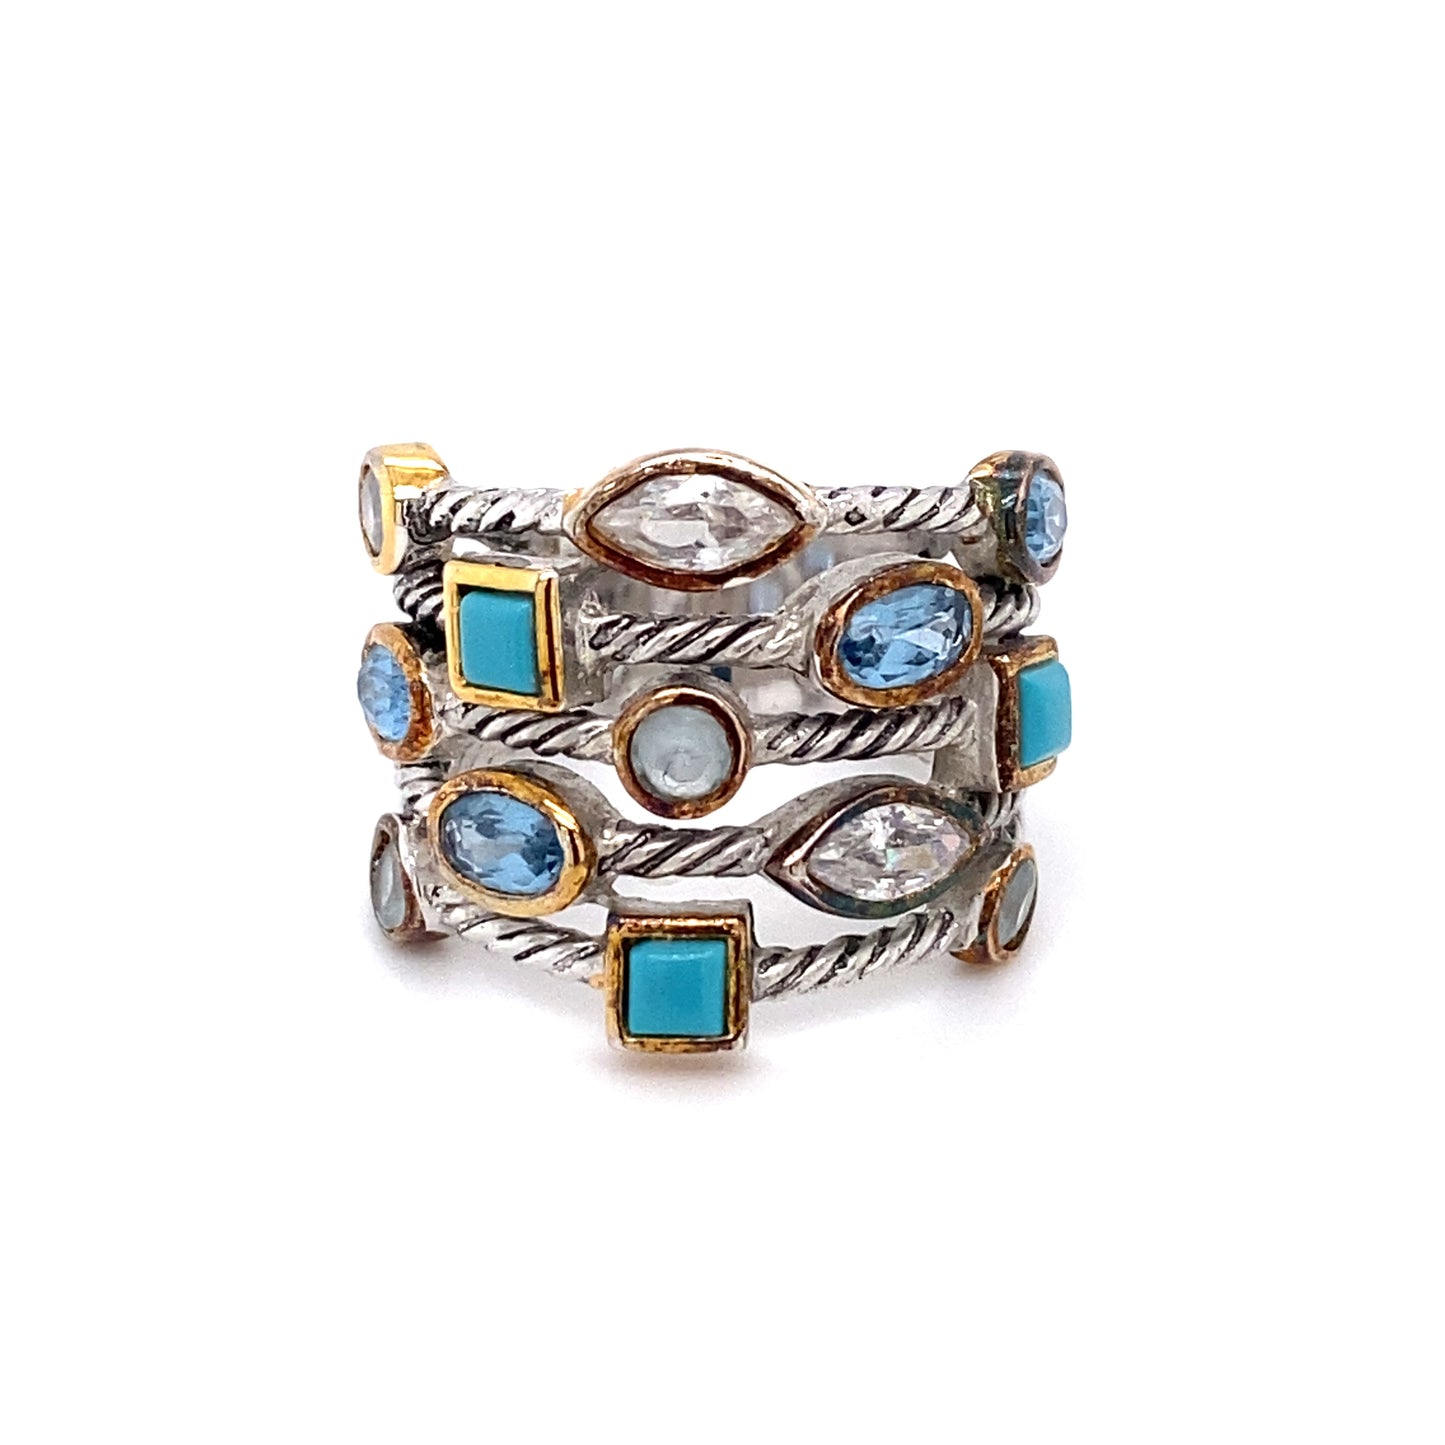 Circa 1990s Topaz, White Quartz and Turquoise Ring in Sterling Silver